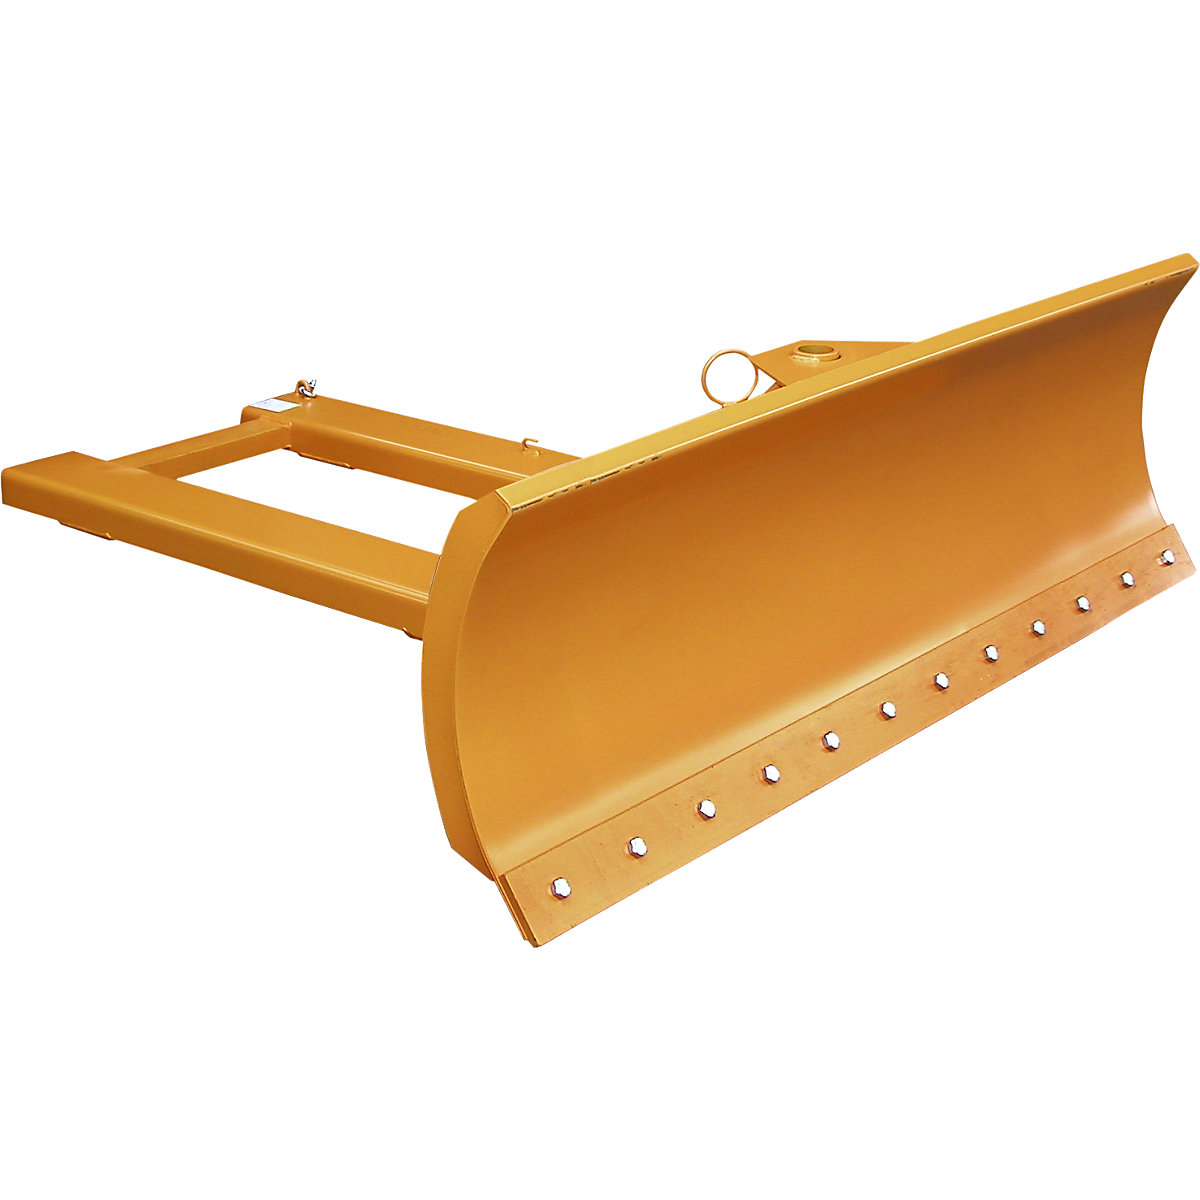 Snow plough for forklifts – eurokraft pro, with steel scraping edge, blade width 1800 mm